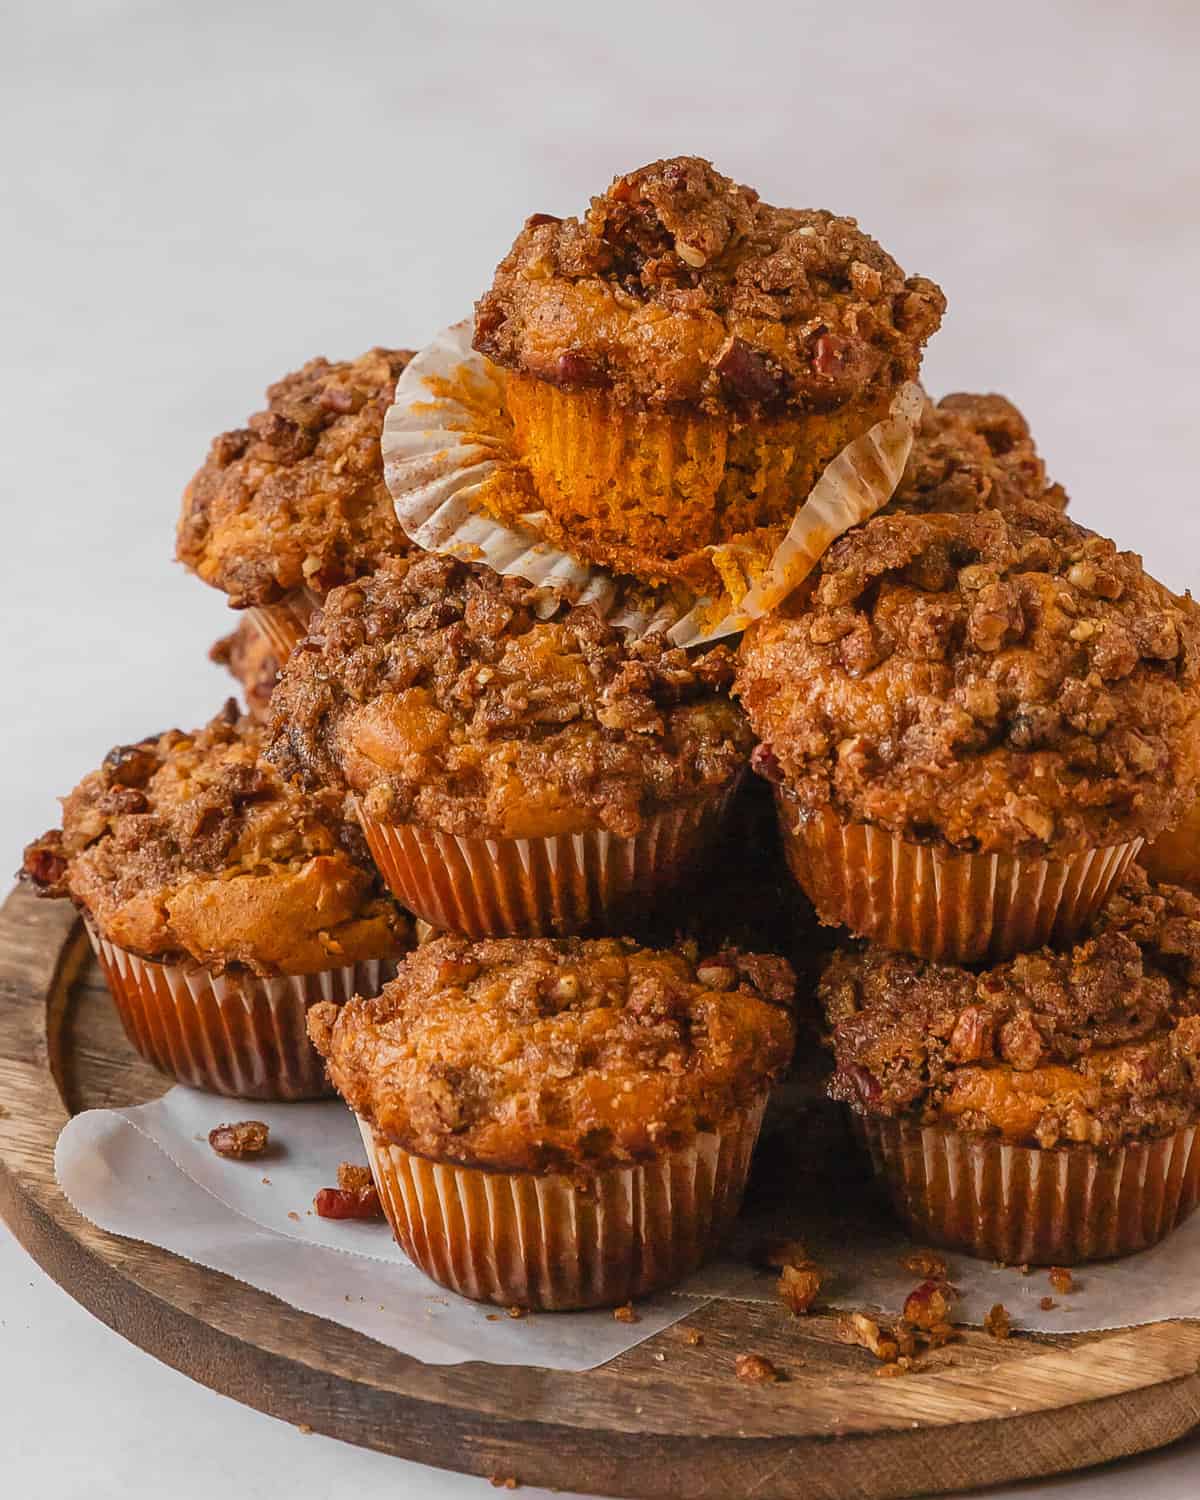 Sweet potato muffins are deliciously soft, moist and fluffy cinnamon spiced muffins with sweet potatoes.  They’re topped with a quick and easy brown sugar cinnamon streusel. Grab one or two for a wonderfully delicious breakfast, snack or dessert.